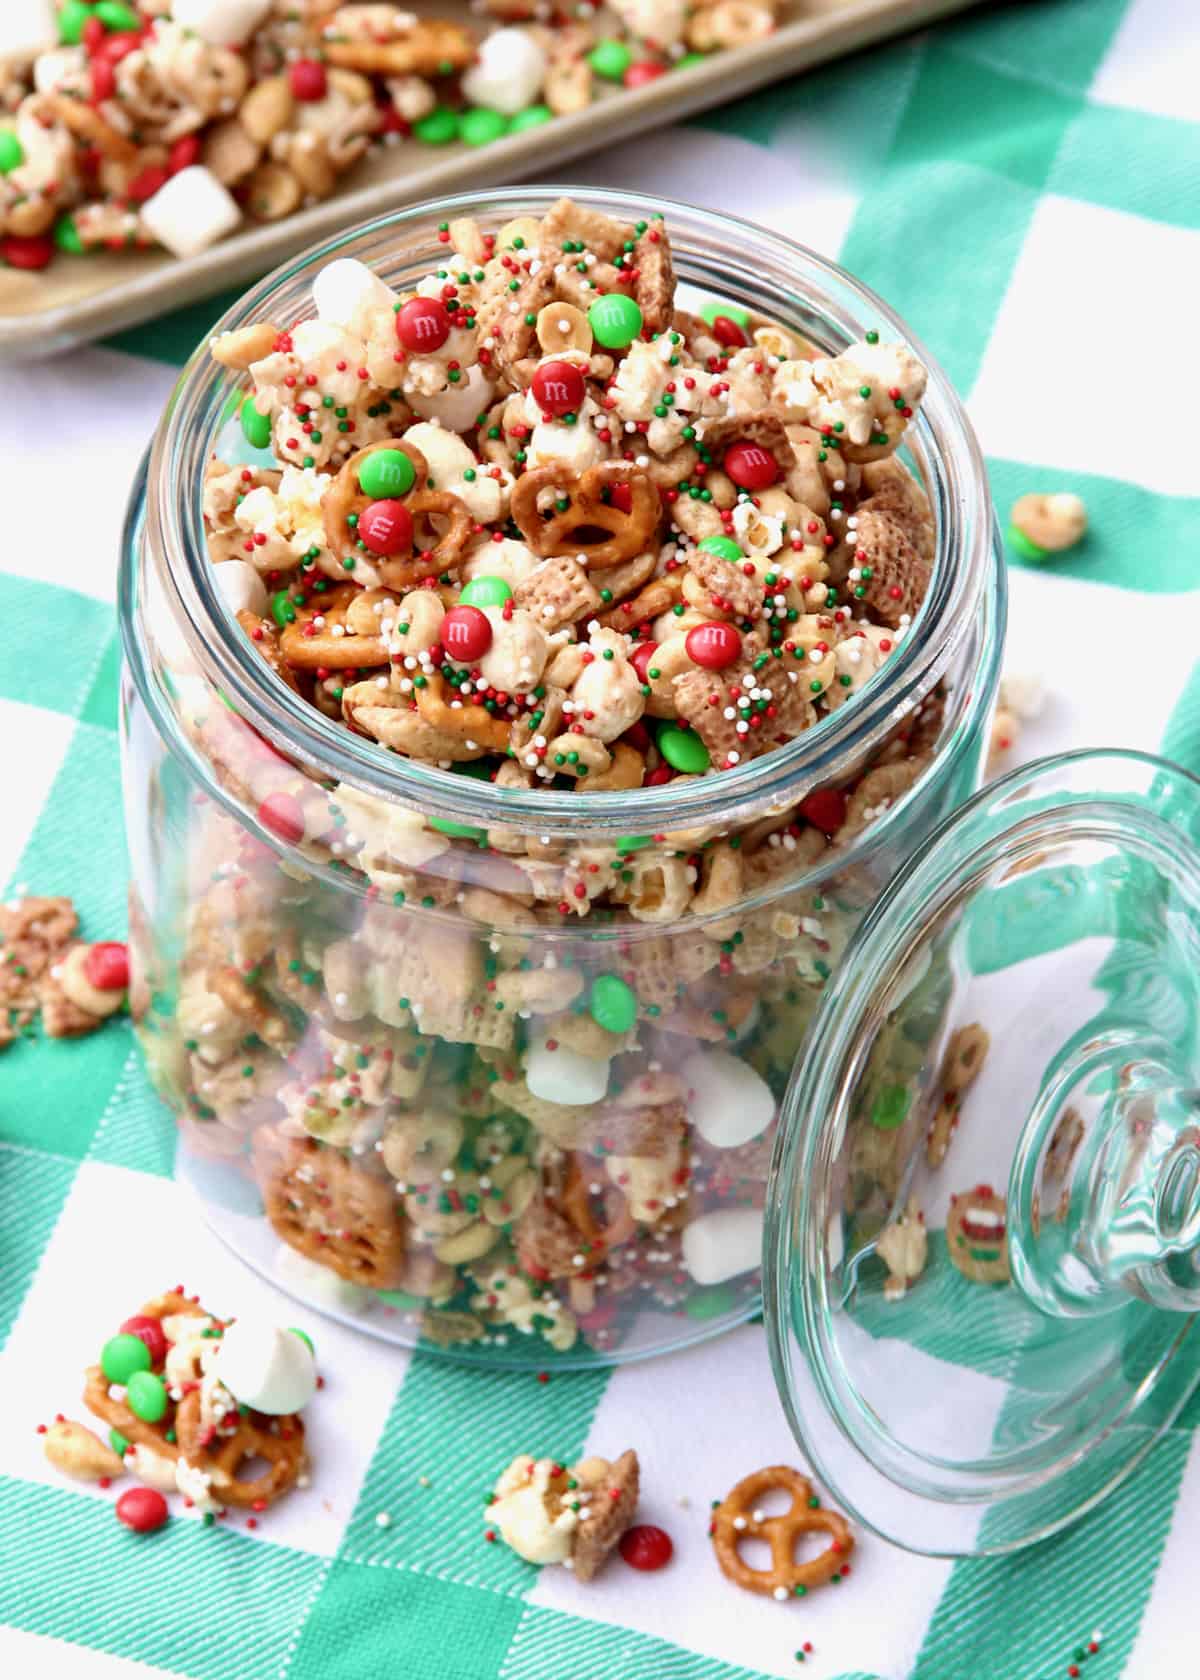 A jar of holiday party snack mix on a green and white gingham table cloth.